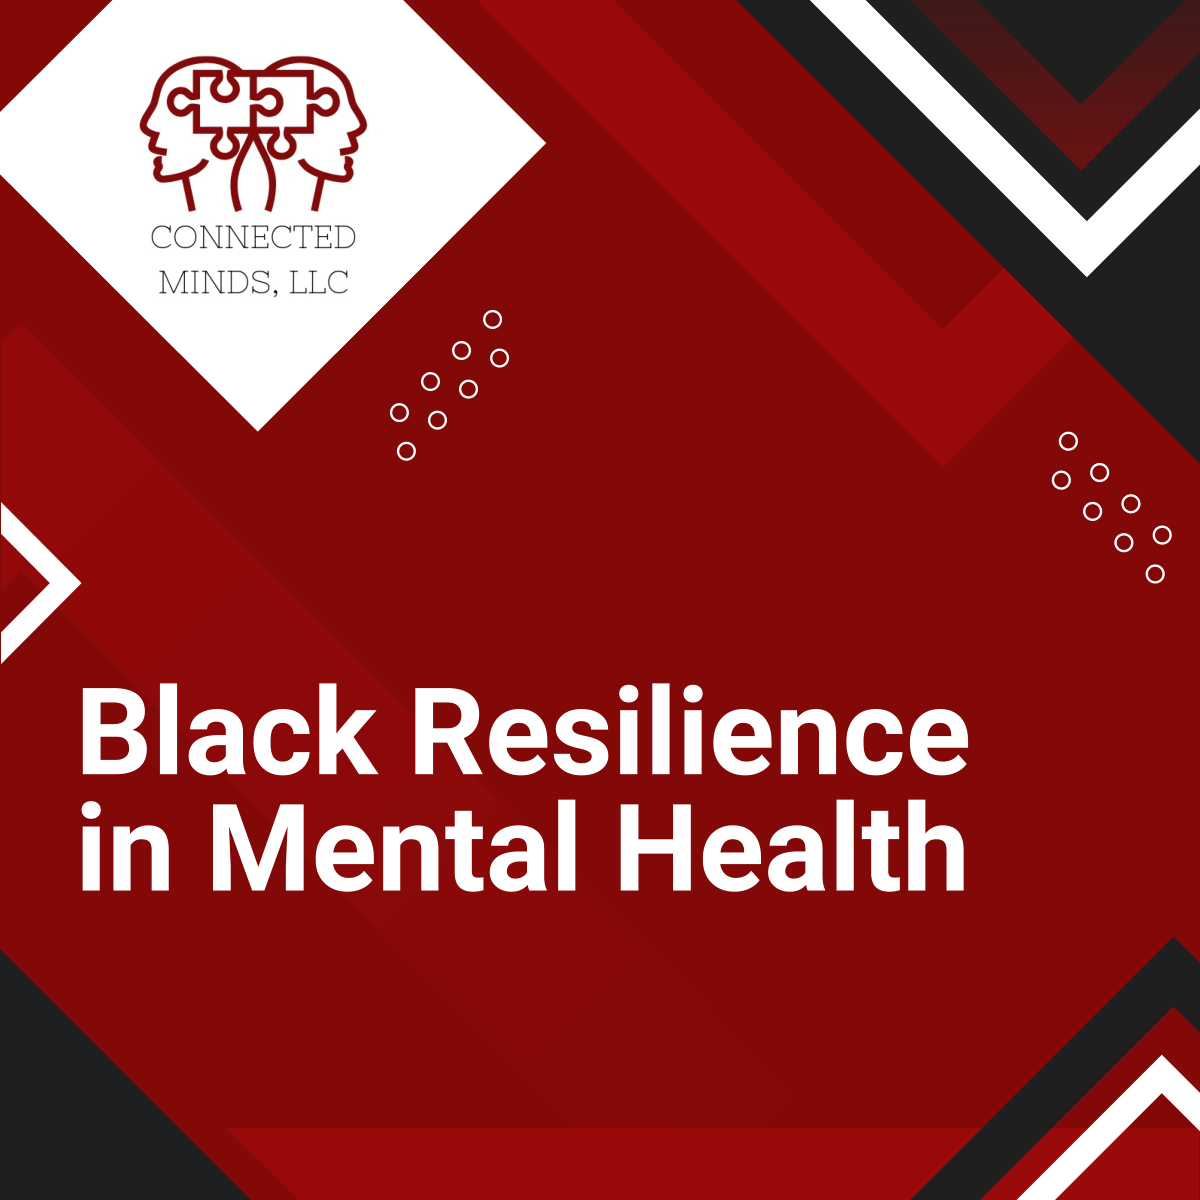 By amplifying stories, challenging stigma, and providing culturally competent care, we can celebrate and support Black individuals in their mental health journeys.

#PsychiatricWellness #BlackResilience #MentalHealth